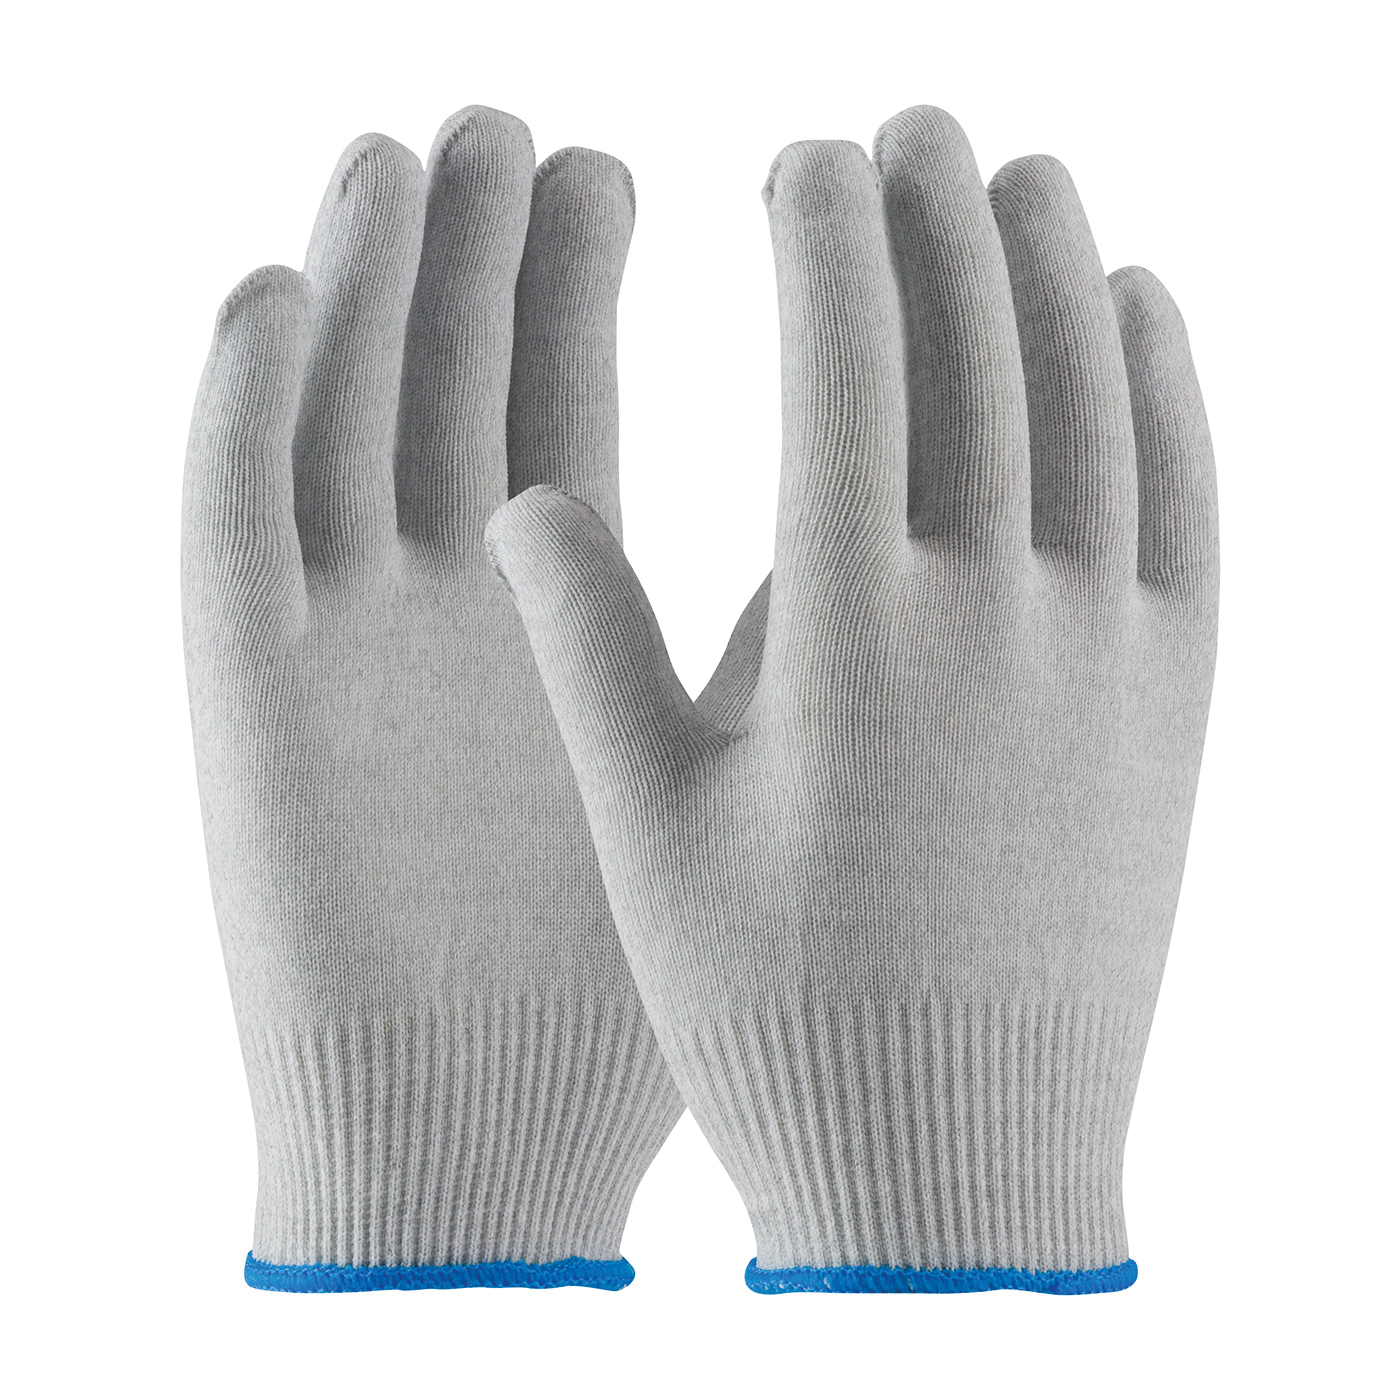 PIP® CleanTeam® 40-6410/XXL Electrostatic Dissipative Antistatic Gloves, Full Finger/Seamless Style, Carbon Fiber/Nylon/Synthetic, Gray/White, Continuous Knit Wrist Cuff, Uncoated Coating, 9.3 in L, Resists: Electrical Surface, ASTM D-257:2007, Paired Hand